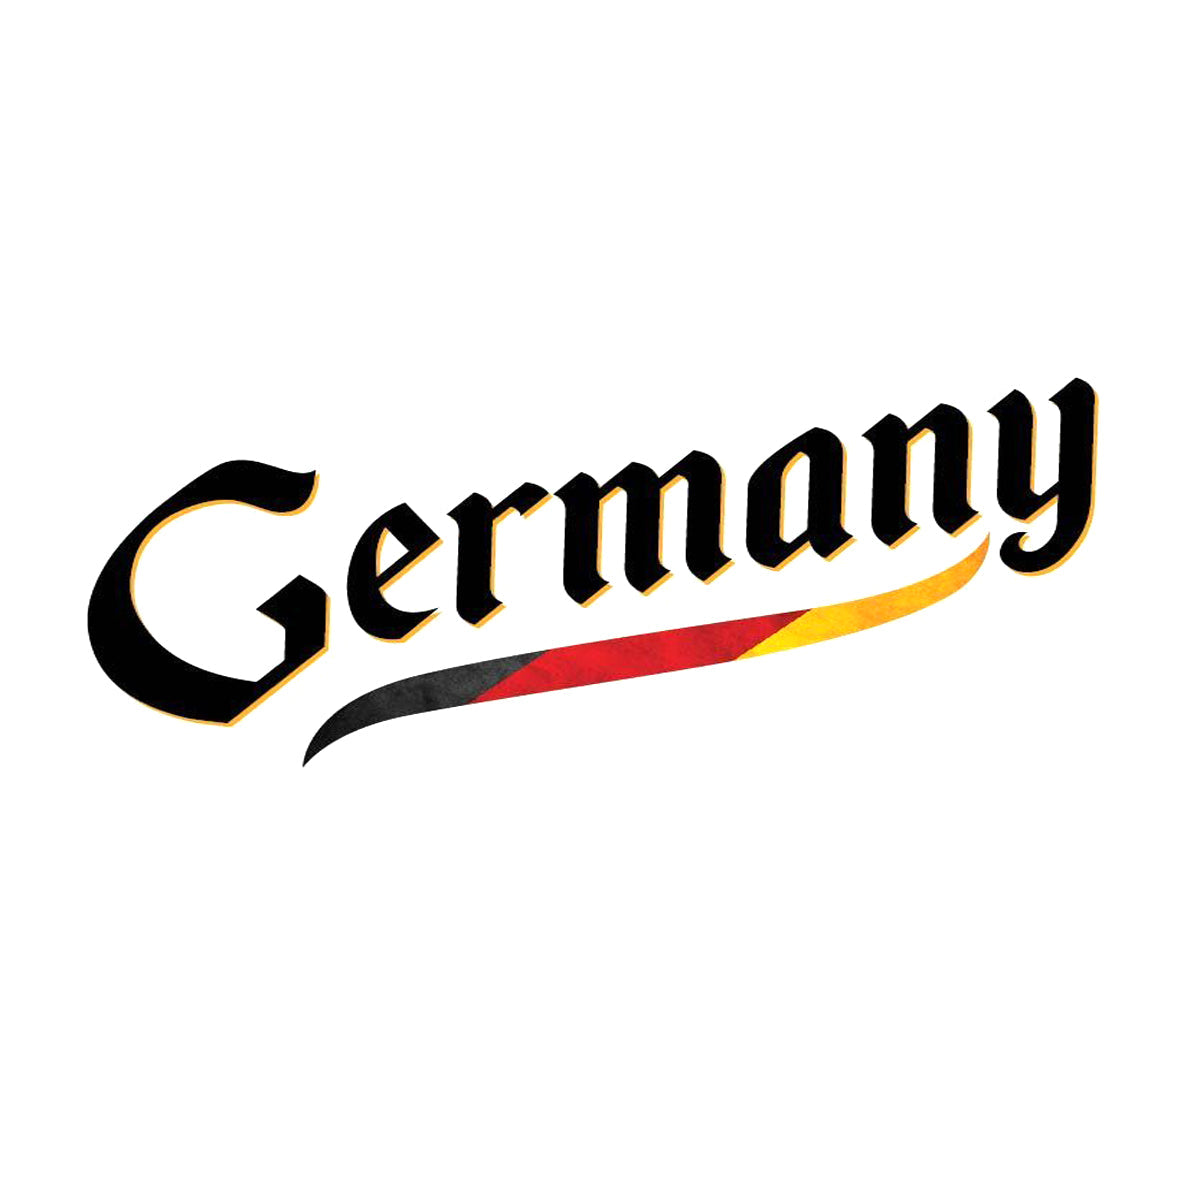 Germany Script World Cup 2022 Printed Tee T-shirts 411 